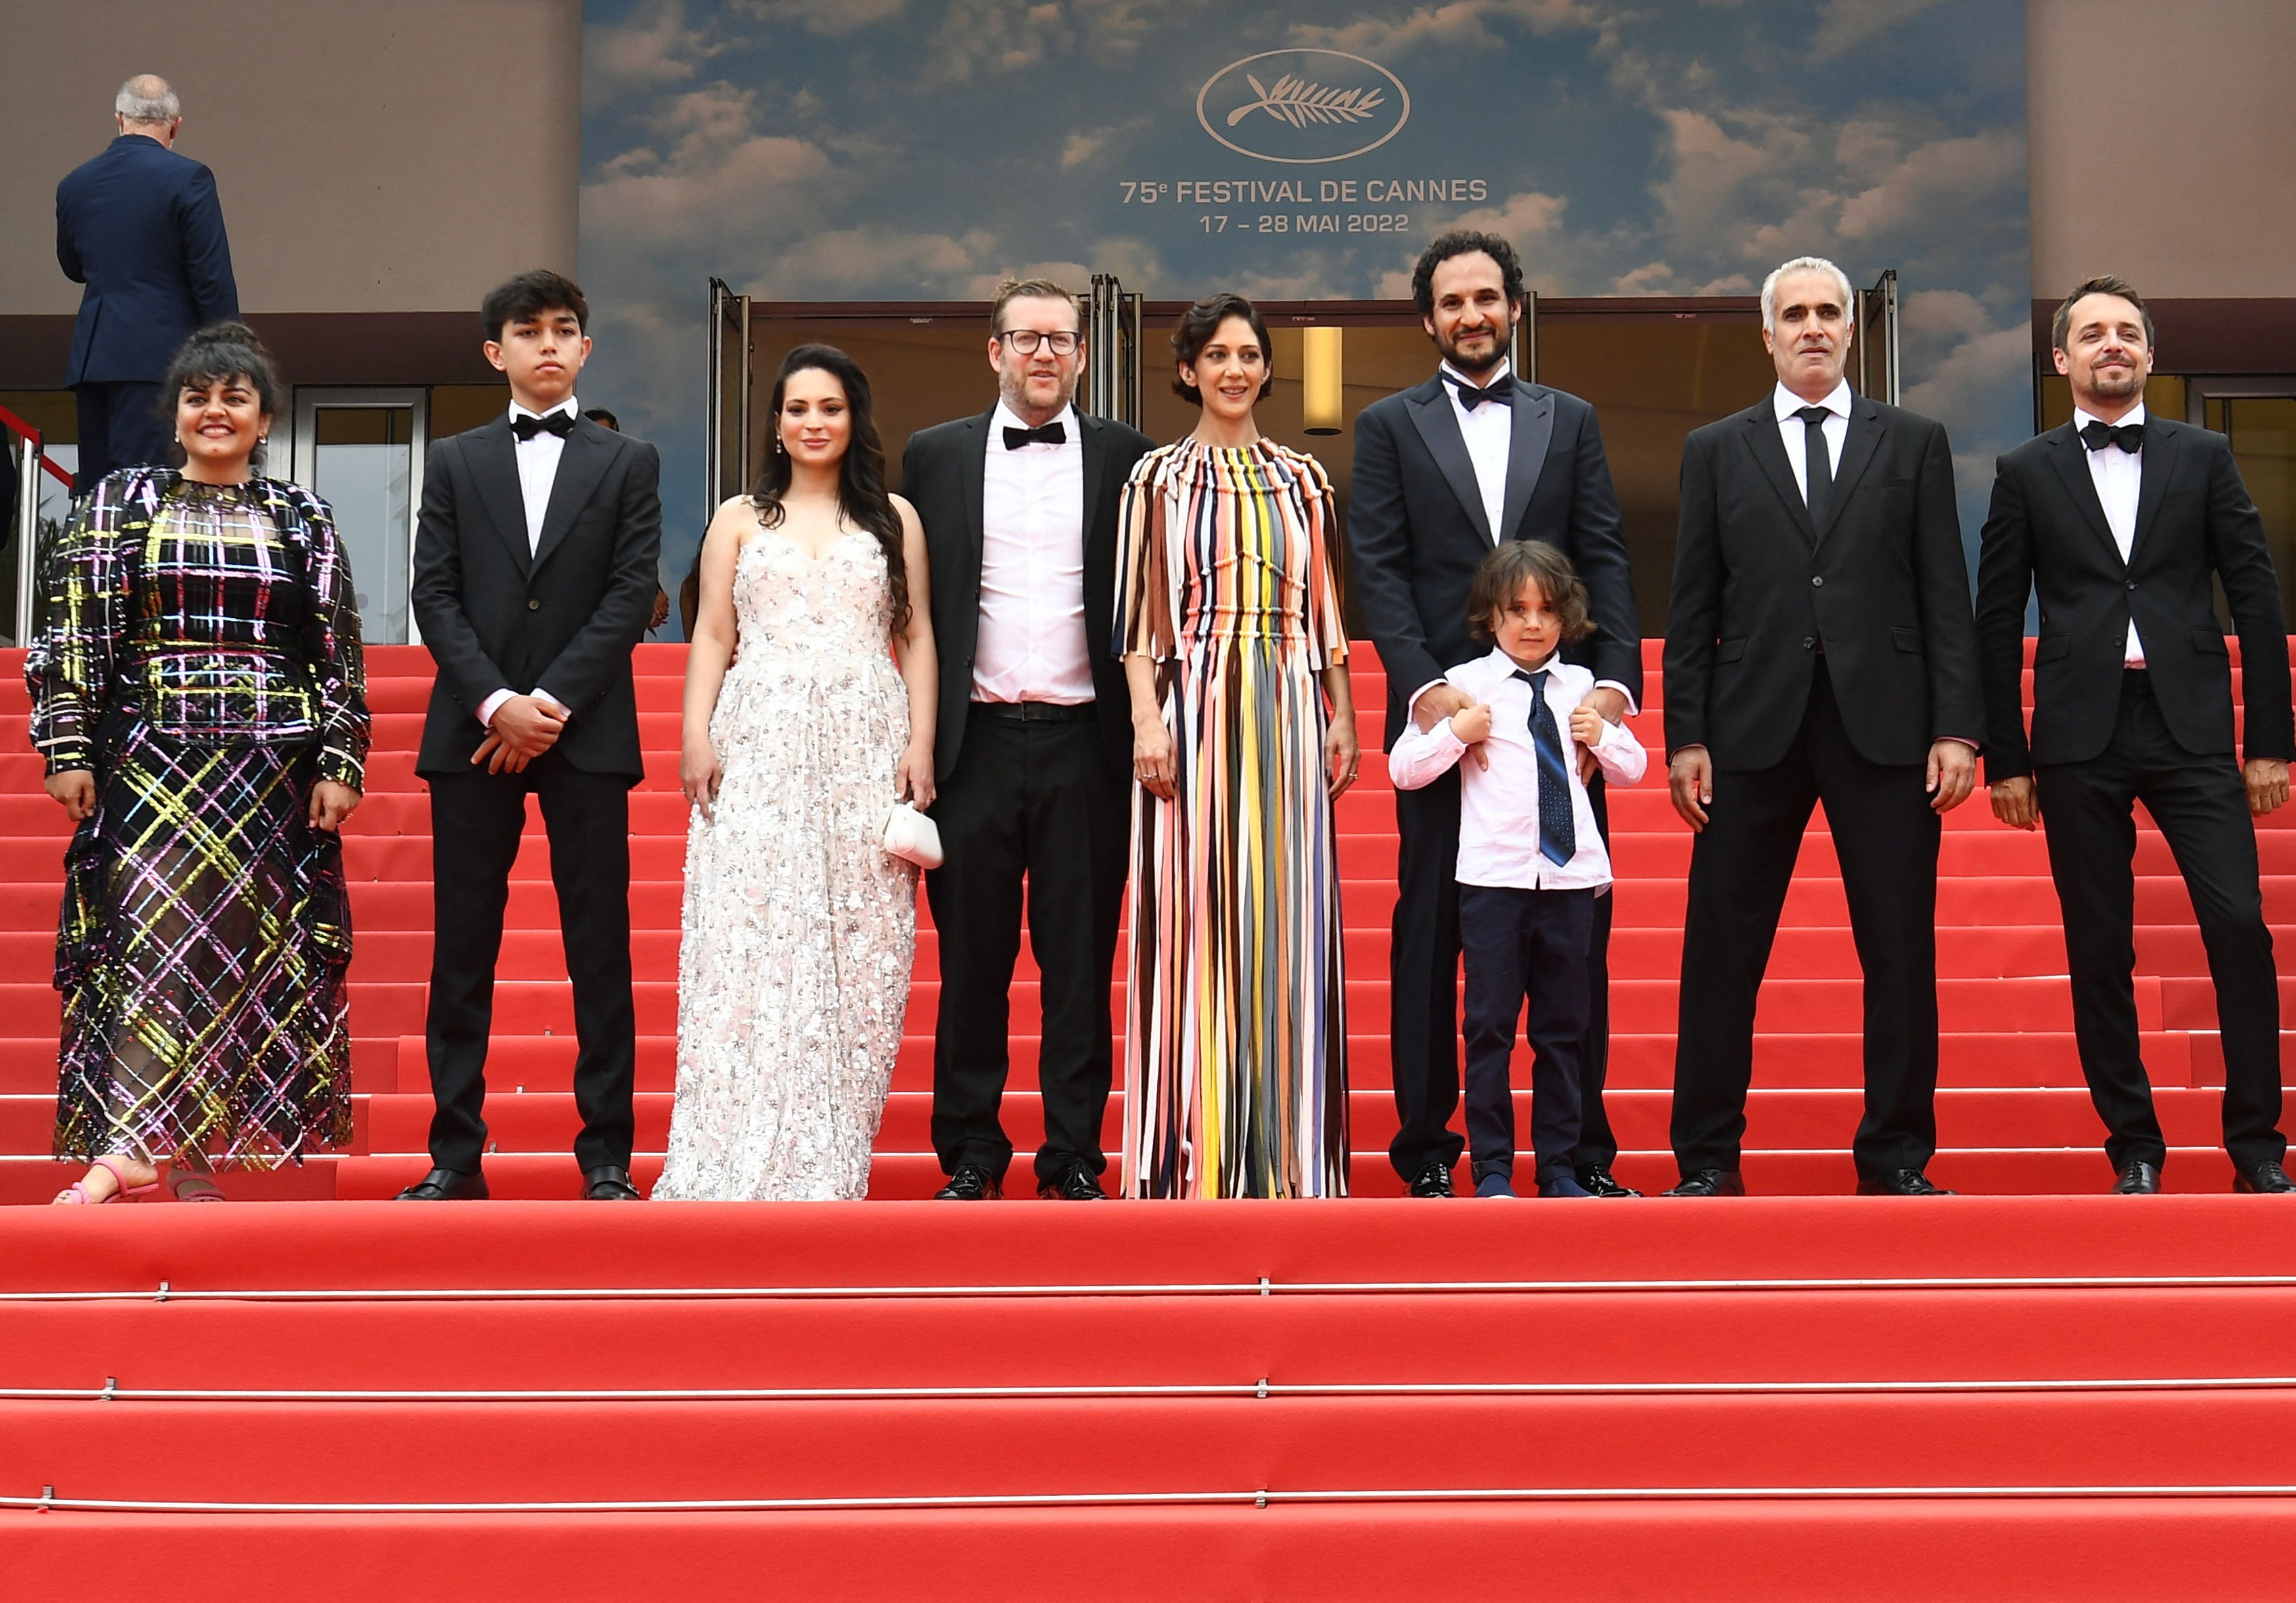 The 75th Cannes Film Festival - Screening of the film "Holy Spider" in competition - Red Carpet Arrivals